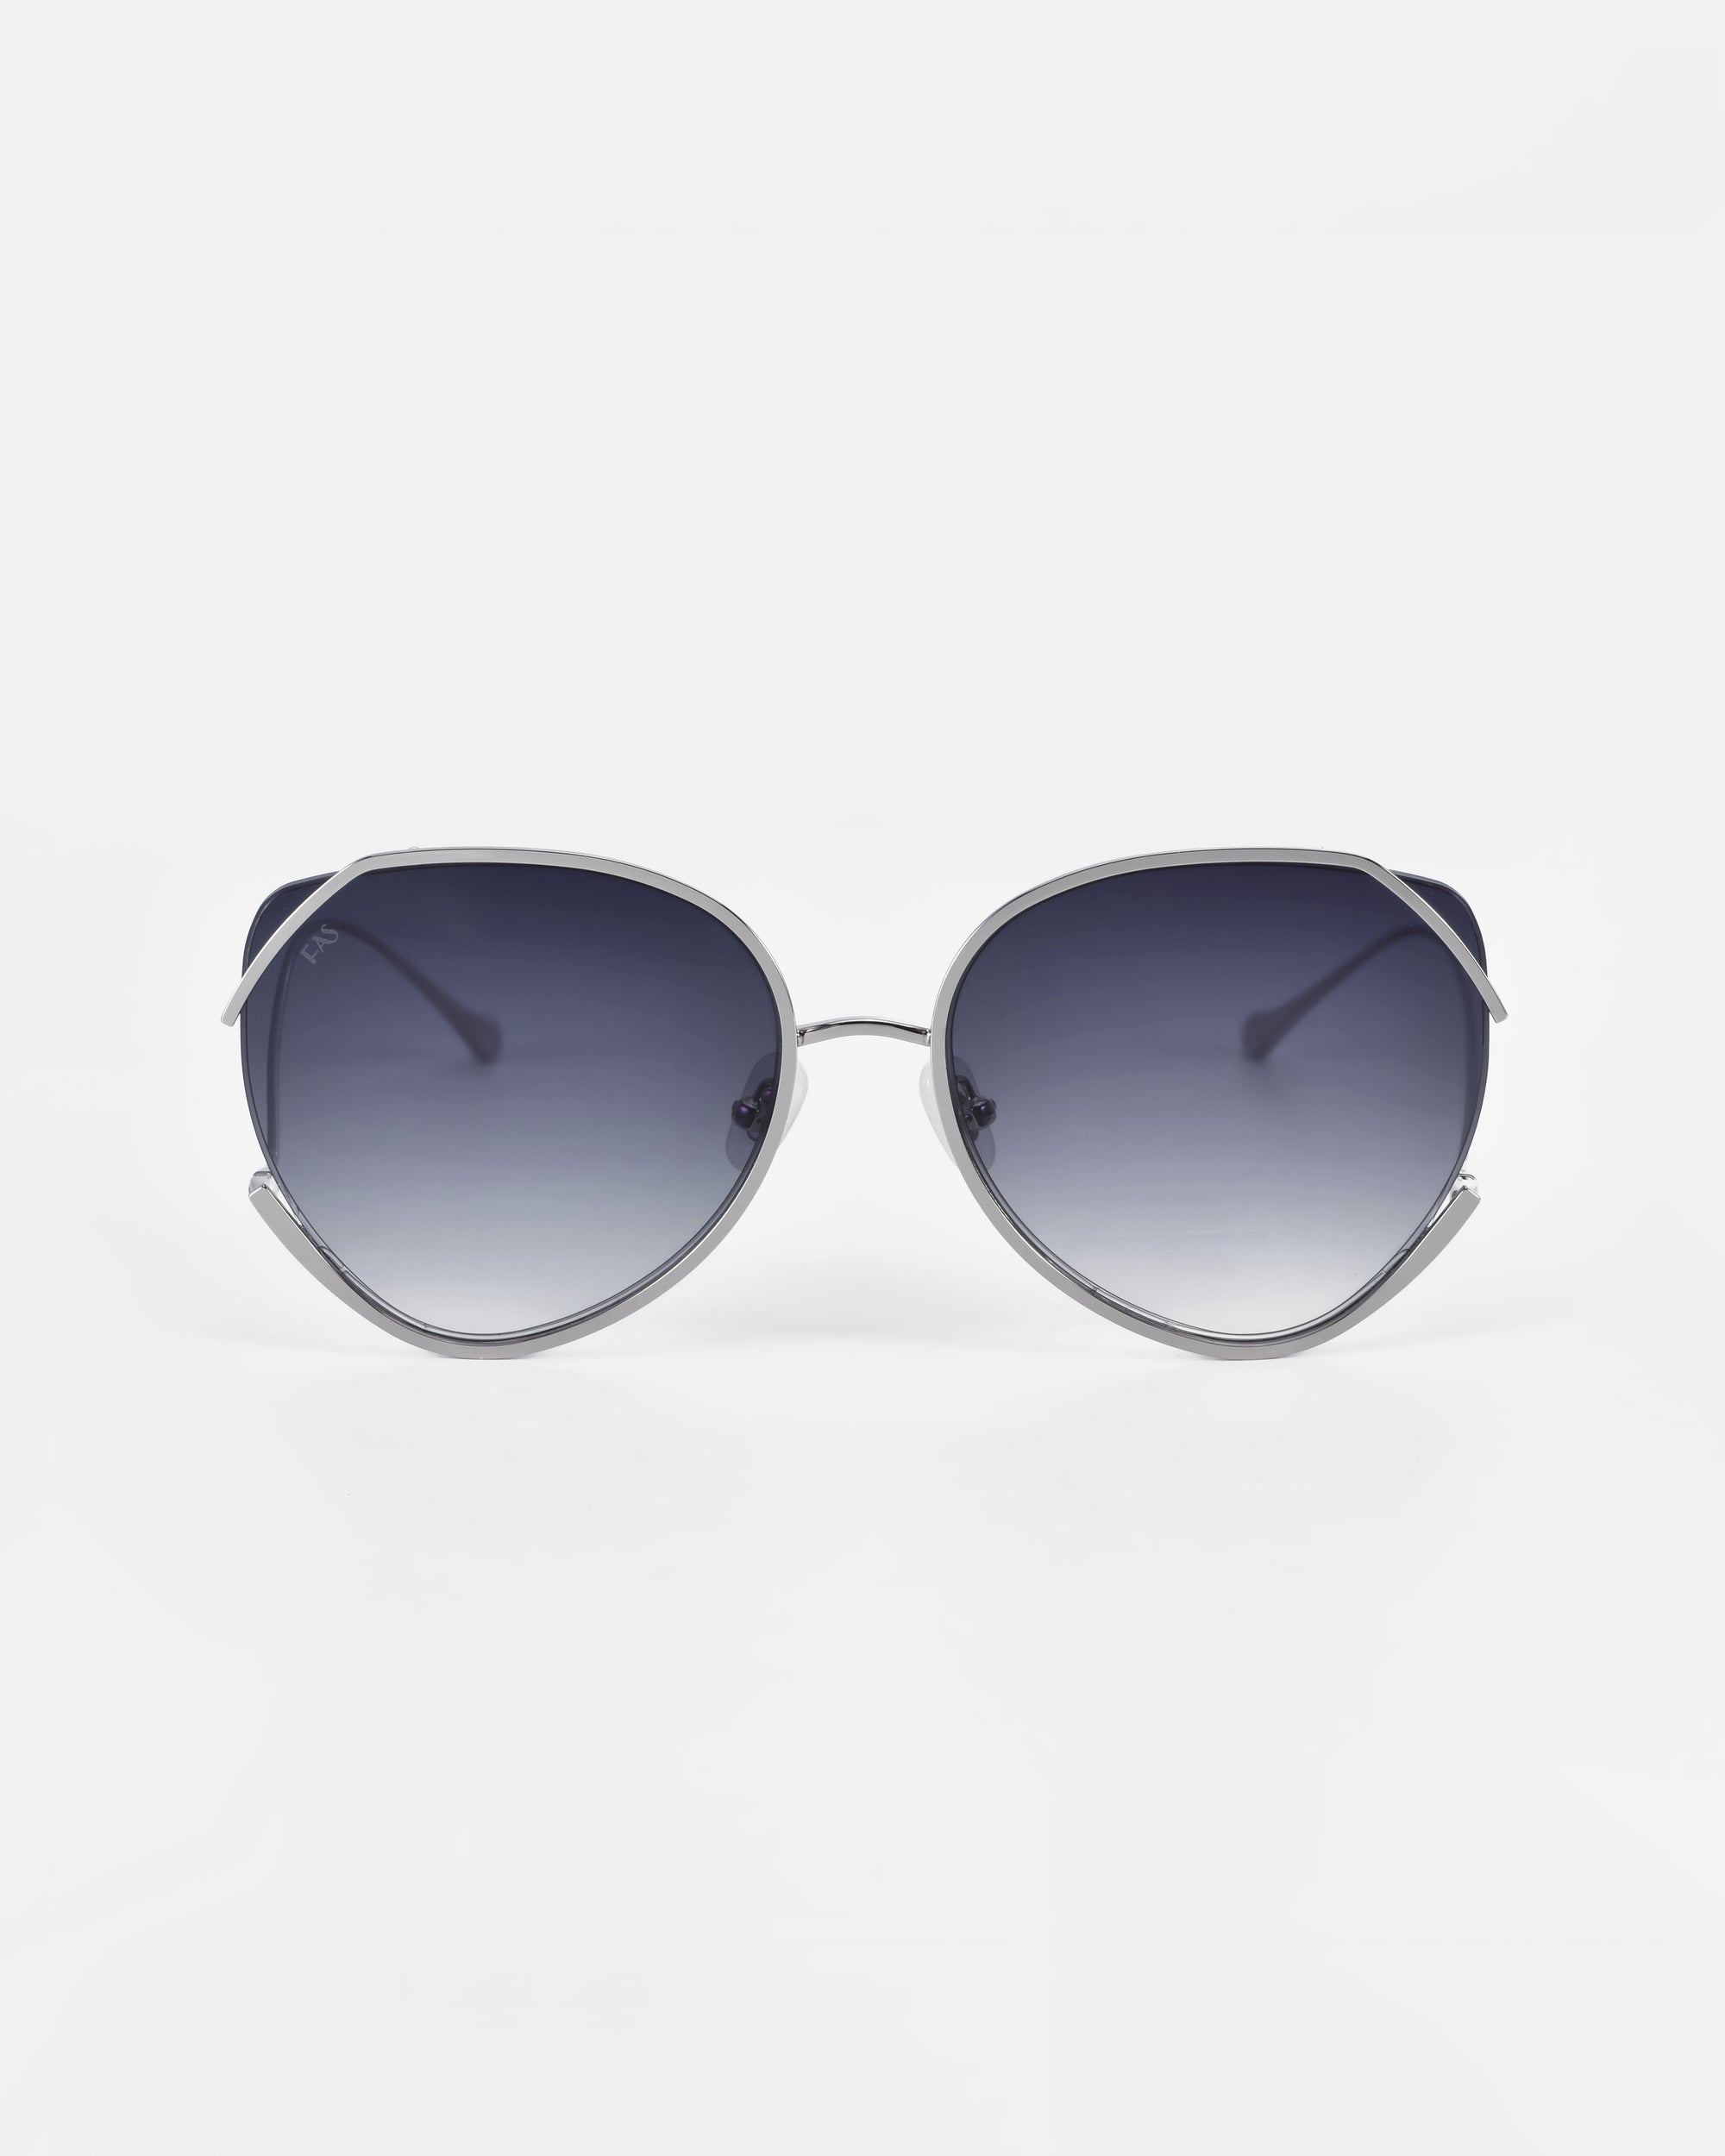 A pair of oversized, cat-eye sunglasses with thin metal frames and ultralightweight gradient lenses that provide 100% UV protection. The frames are sleek and metallic, complemented by jadestone nose pads for added comfort. The overall aesthetic is modern and chic. Introducing Wonderland by For Art's Sake®.